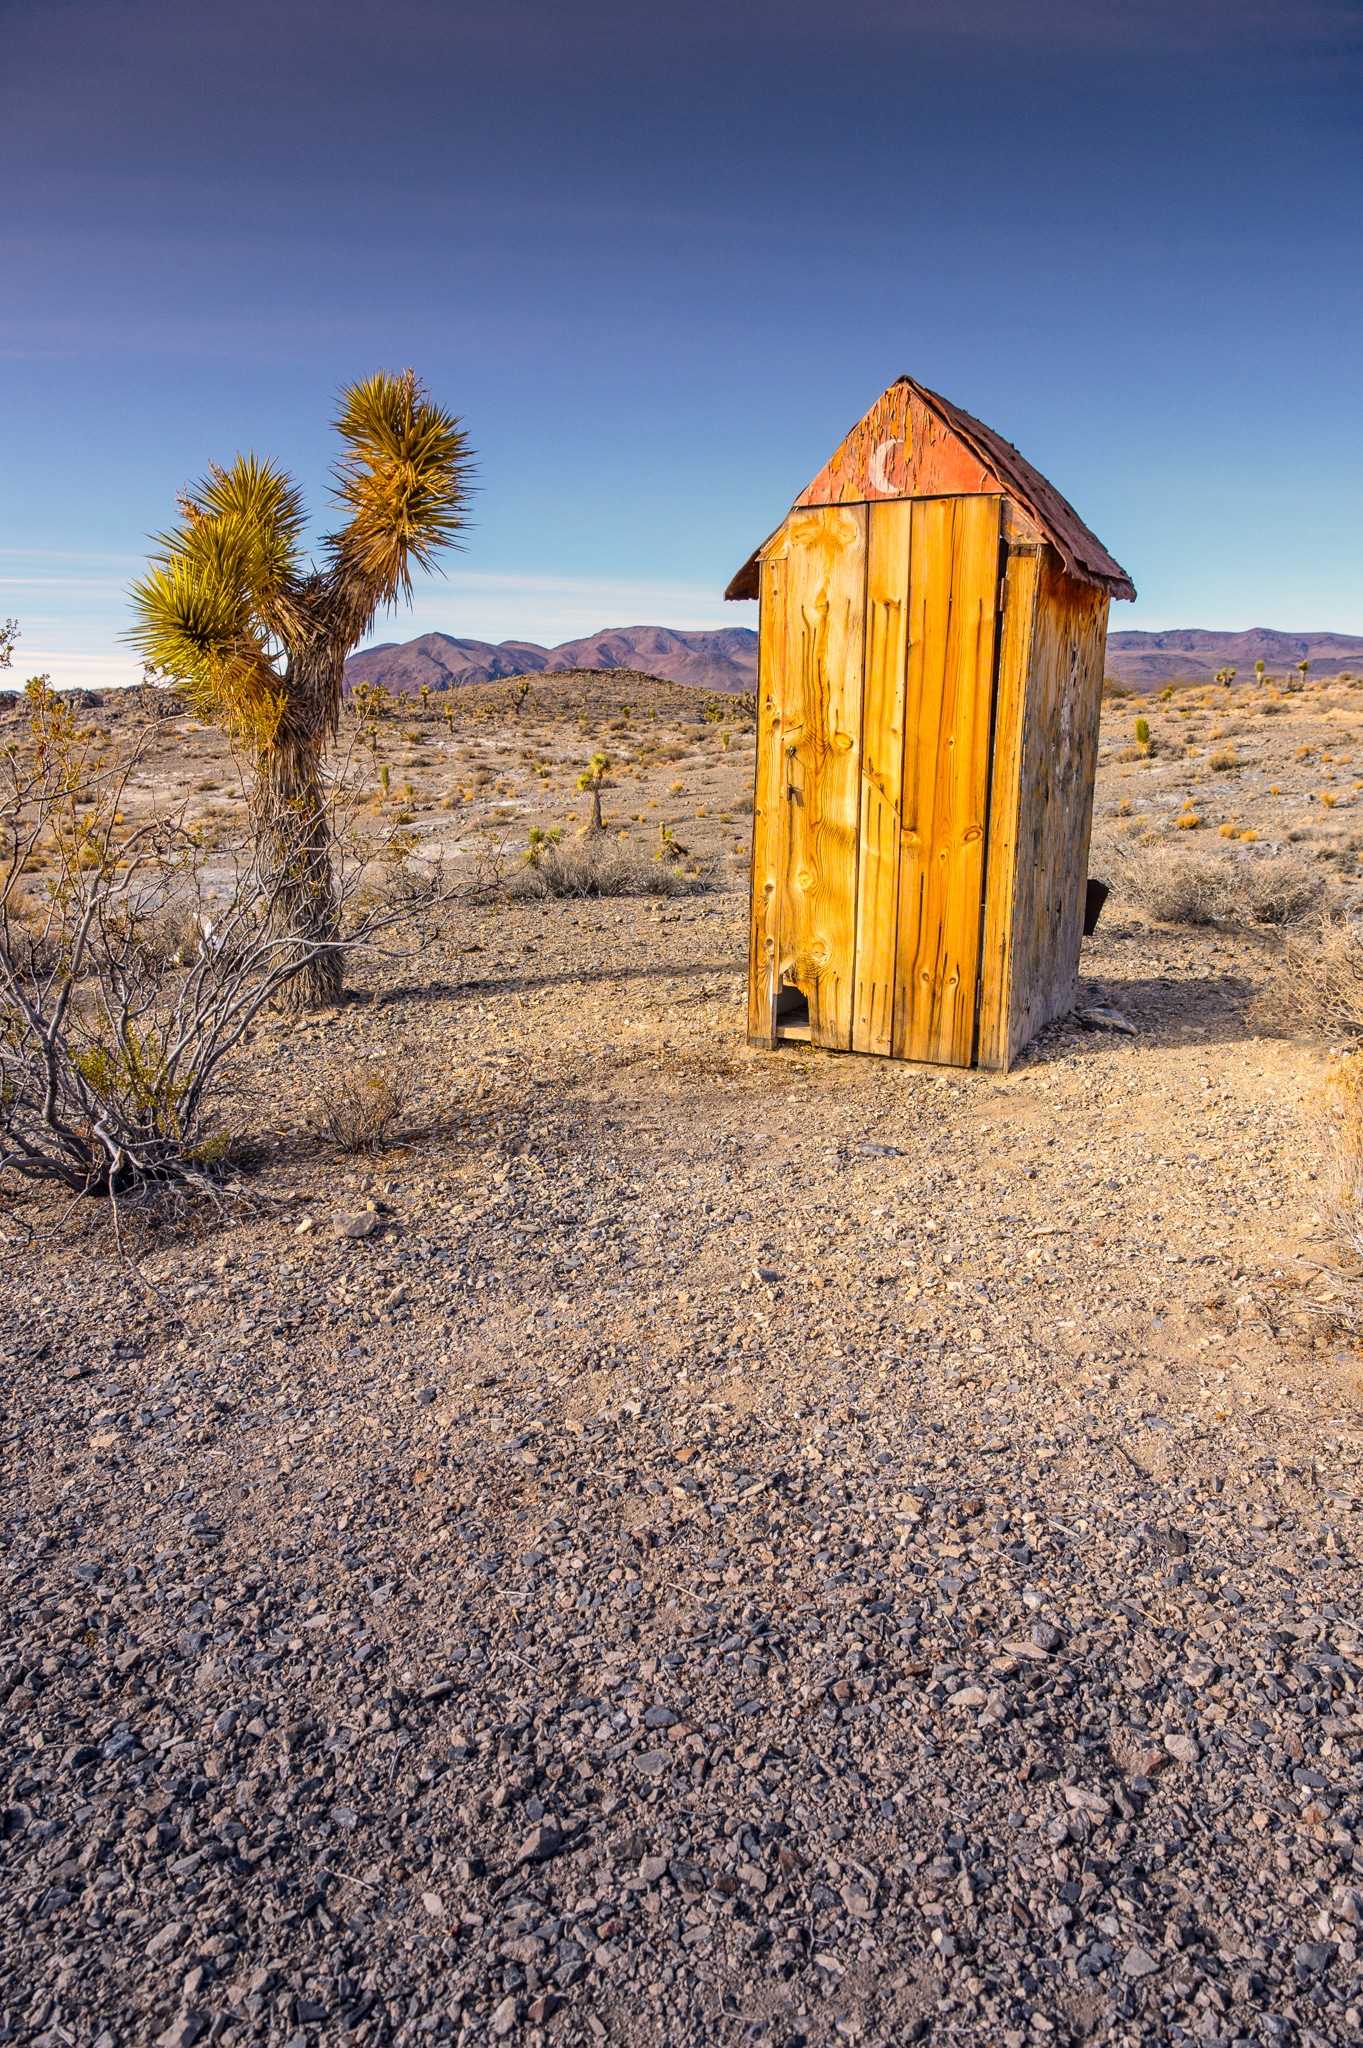 Located along Saline Valley Road, on the way to the Lee Flat Joshua Tree forest, is a boxcar that was part of the BLM's Adopt-a-Cabin program. It is semi-maintained and can be used as an overnight accommodation by travelers exploring this part of Death Valley National Park, California. Along with the cabin is this lonely, but functional, outhouse.